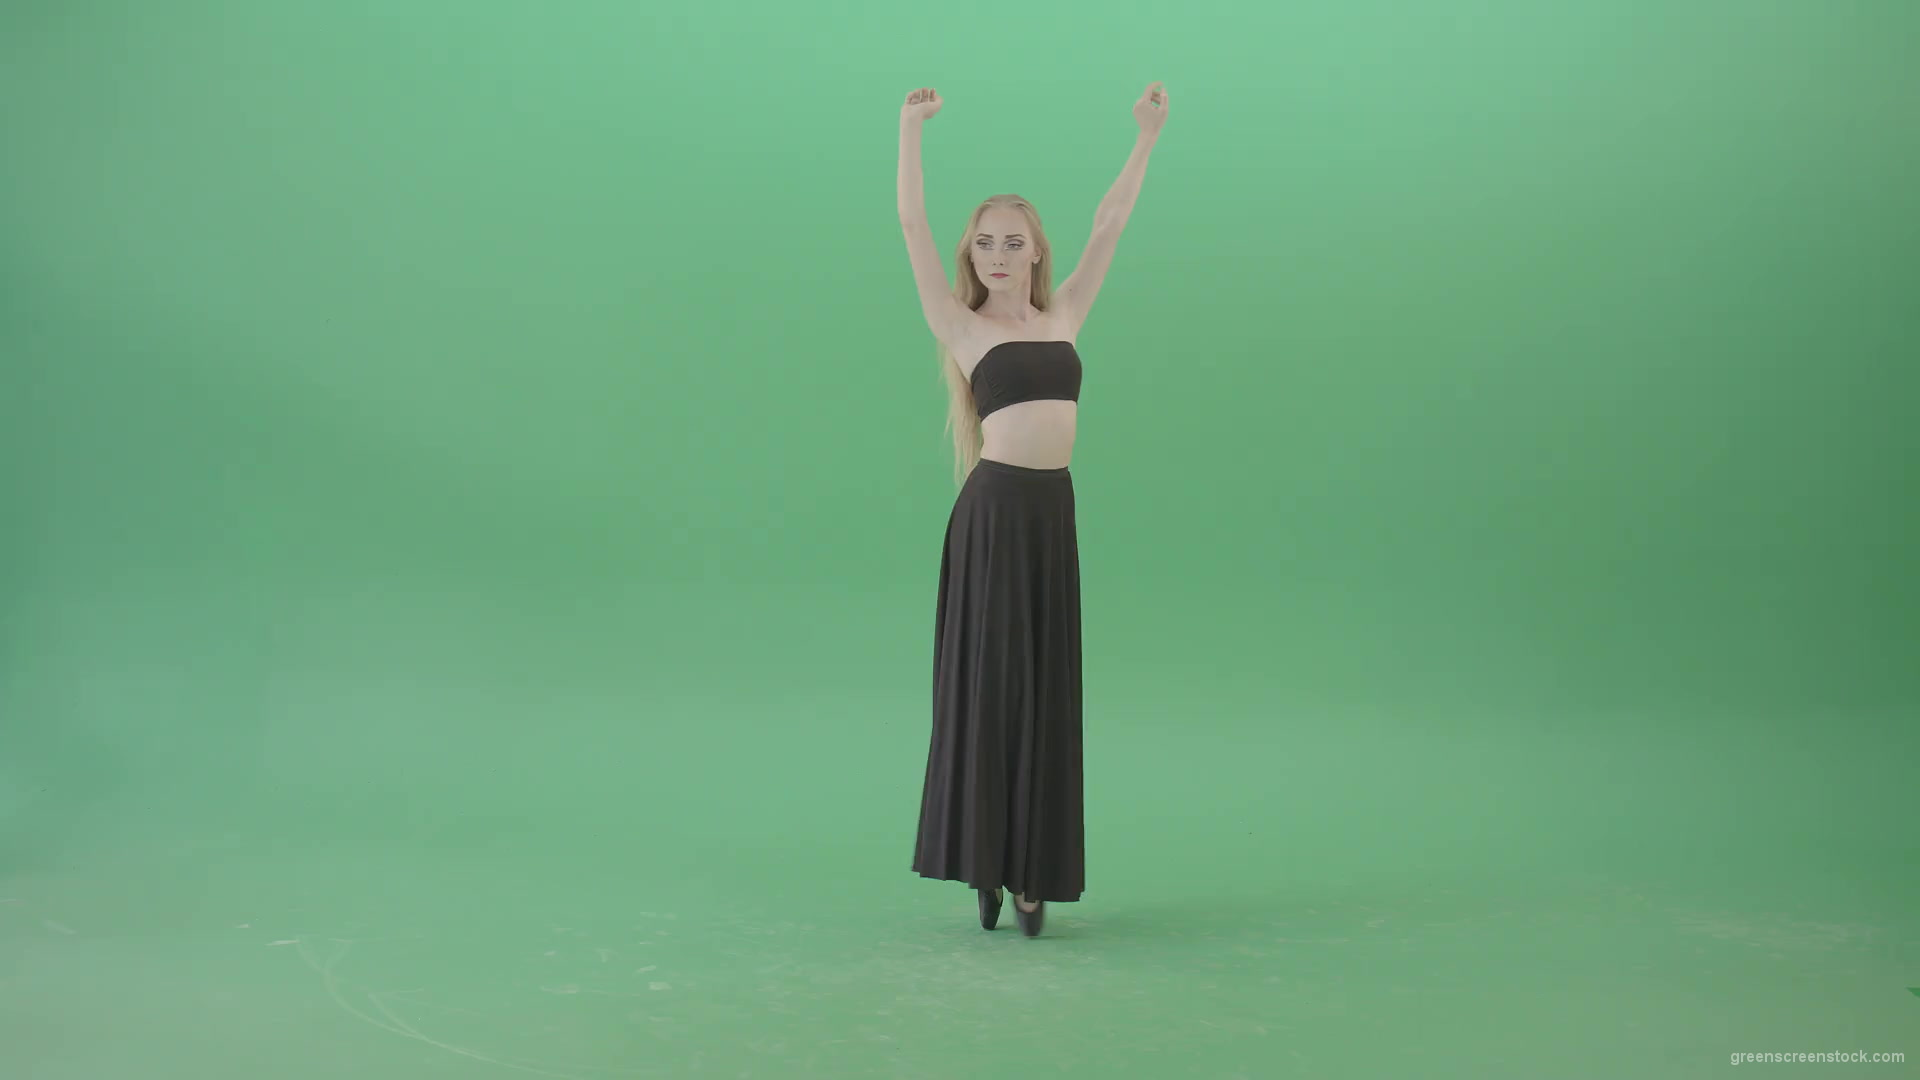 Spain-Ballet-dance-by-blonde-passion-ballerina-girl-on-green-screen-4K-Video-Footage-1920_001 Green Screen Stock